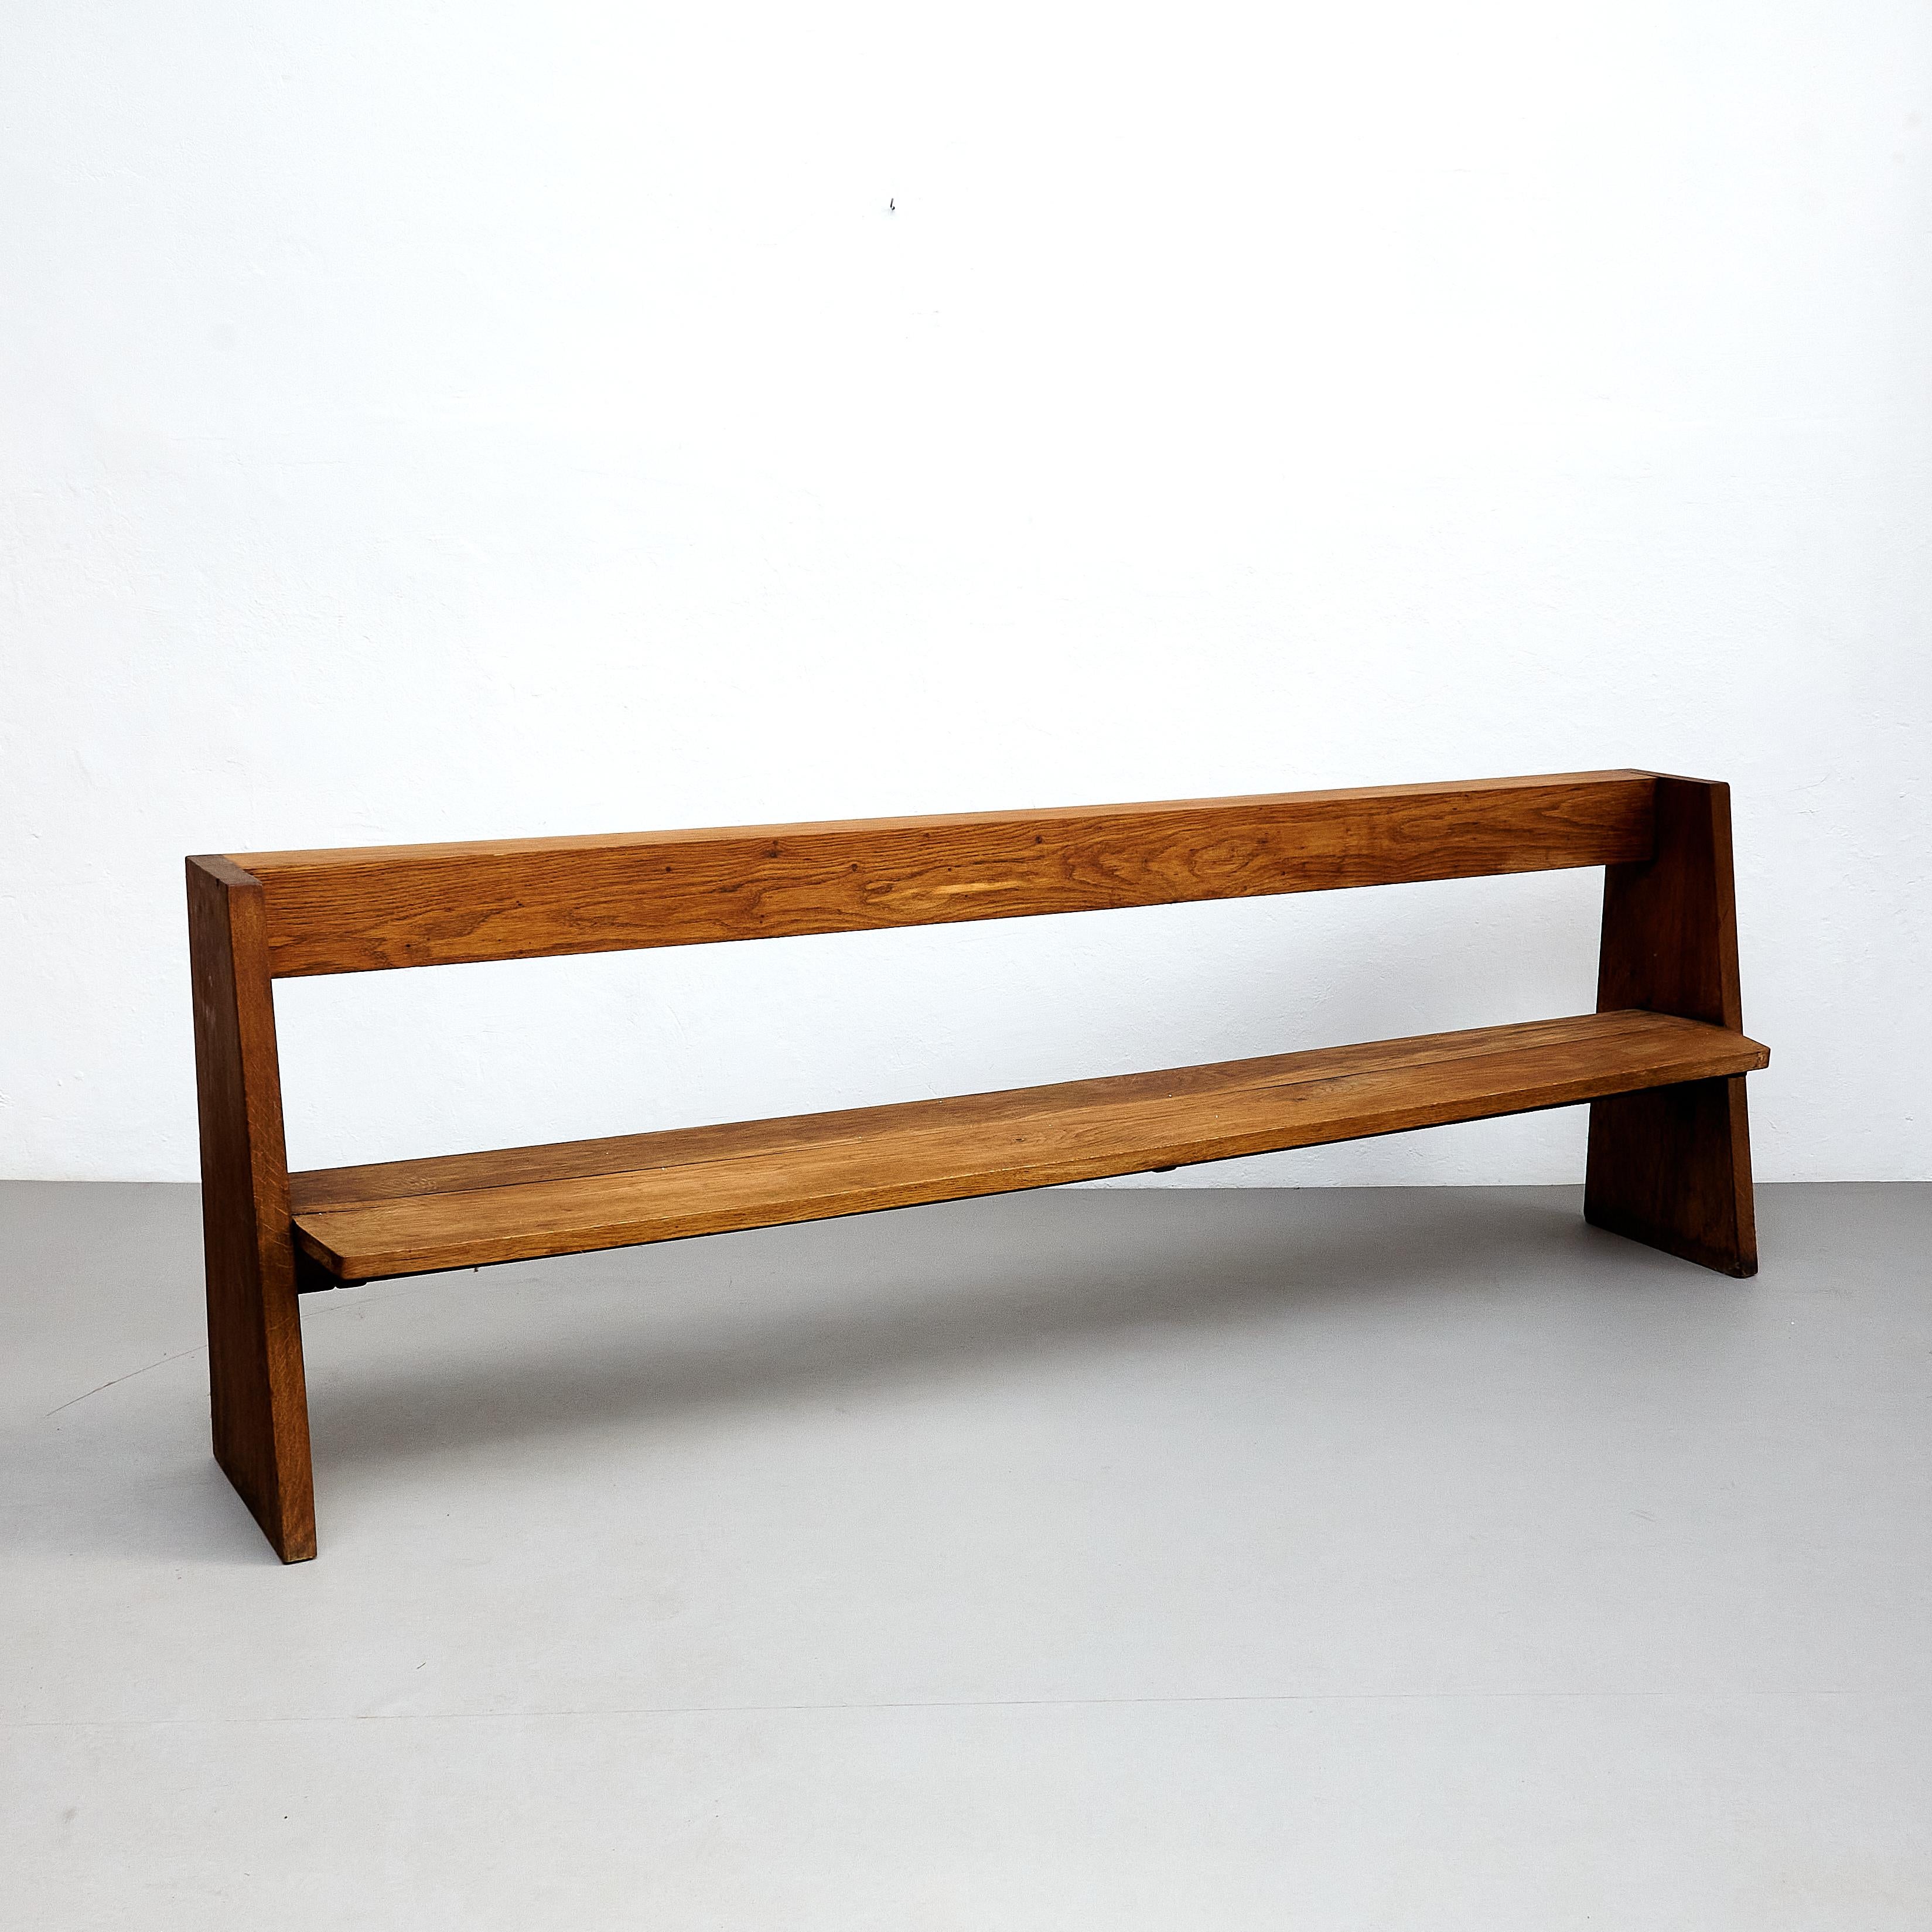 French Mid-Century Modern Large Rationalist Wood Bench, circa 1960 For Sale